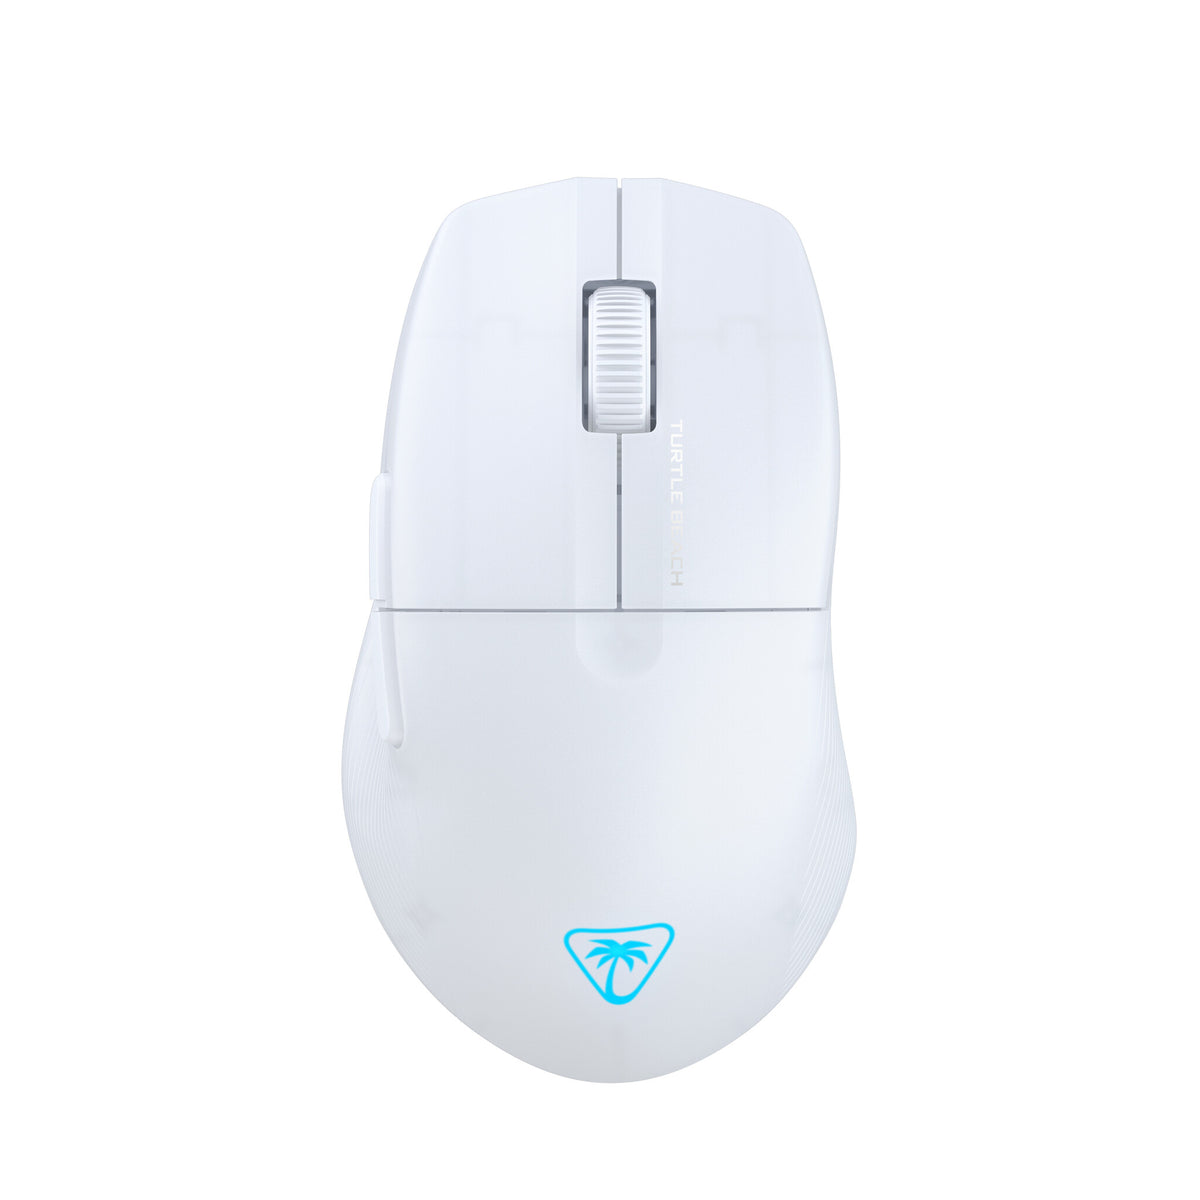 Turtle Beach Pure Air - Ultra-Light RGB Wireless Gaming Mouse in White - 26,000 DPI